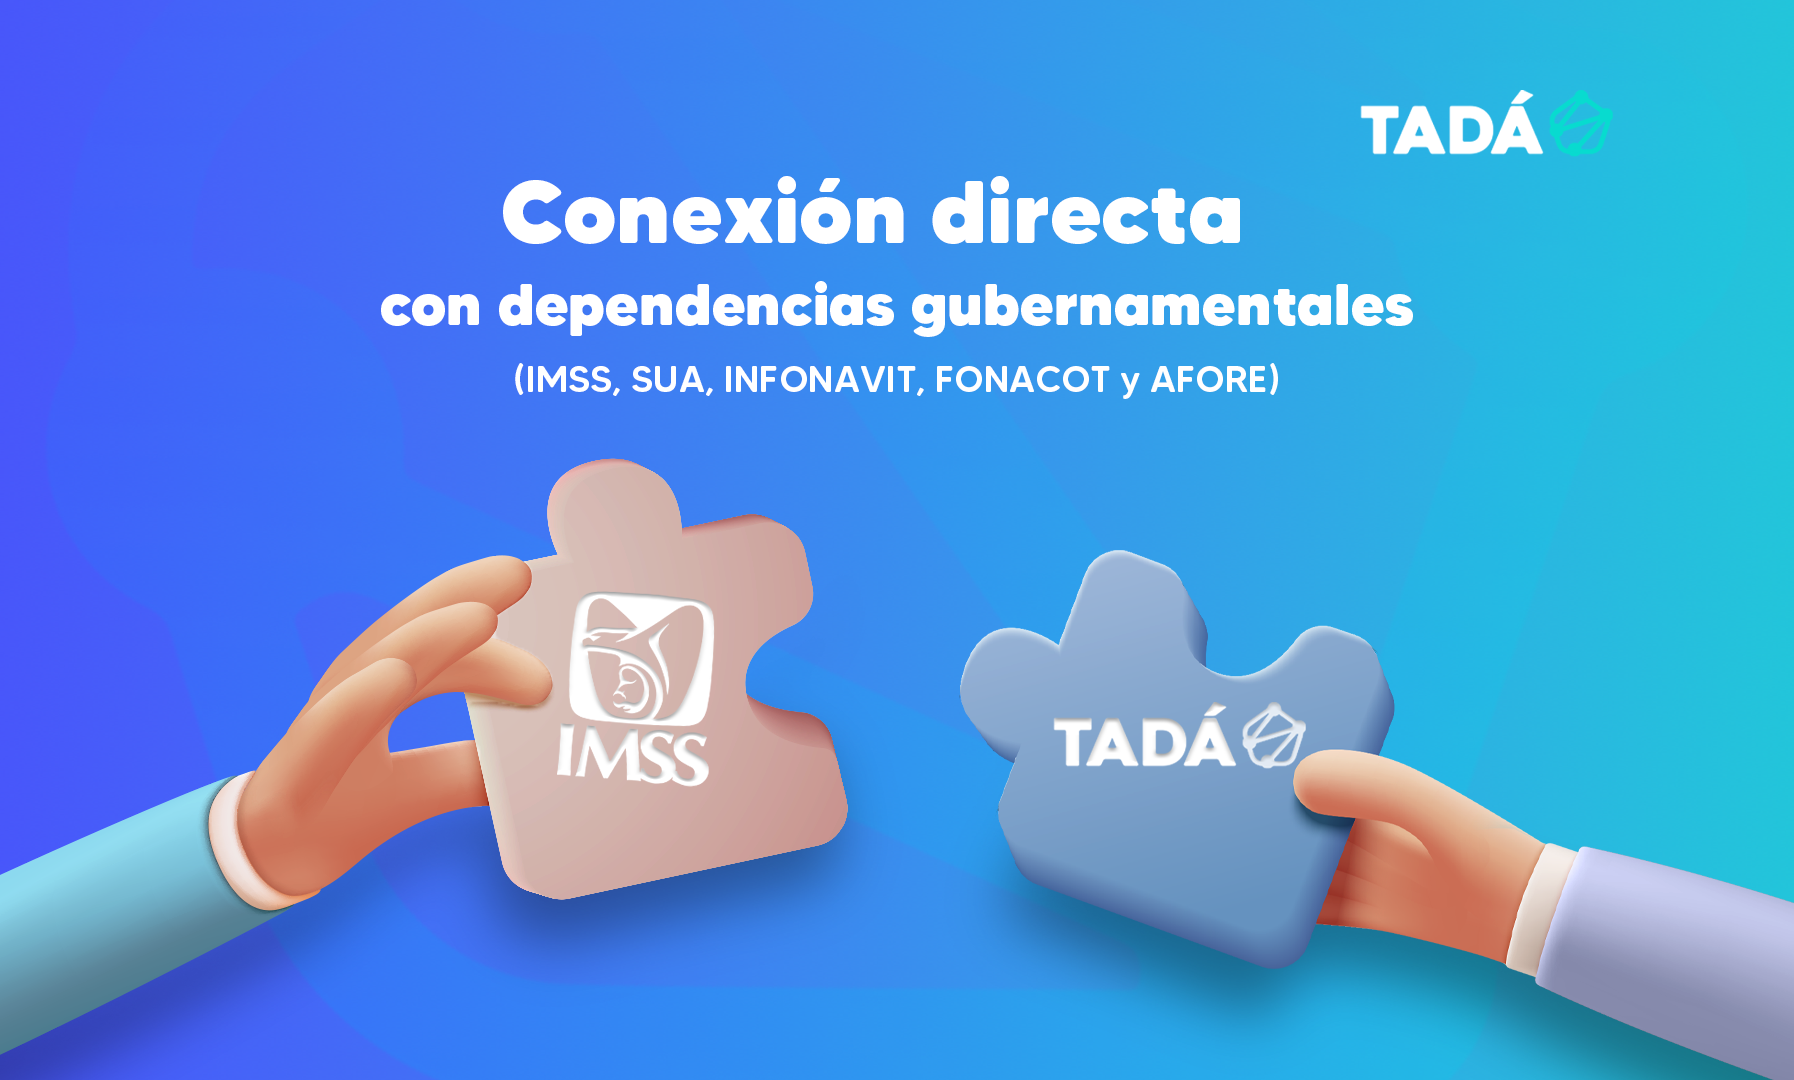 Have direct connection with government entities (IMSS, SUA, INFONAVIT, FONACOT y AFORE)